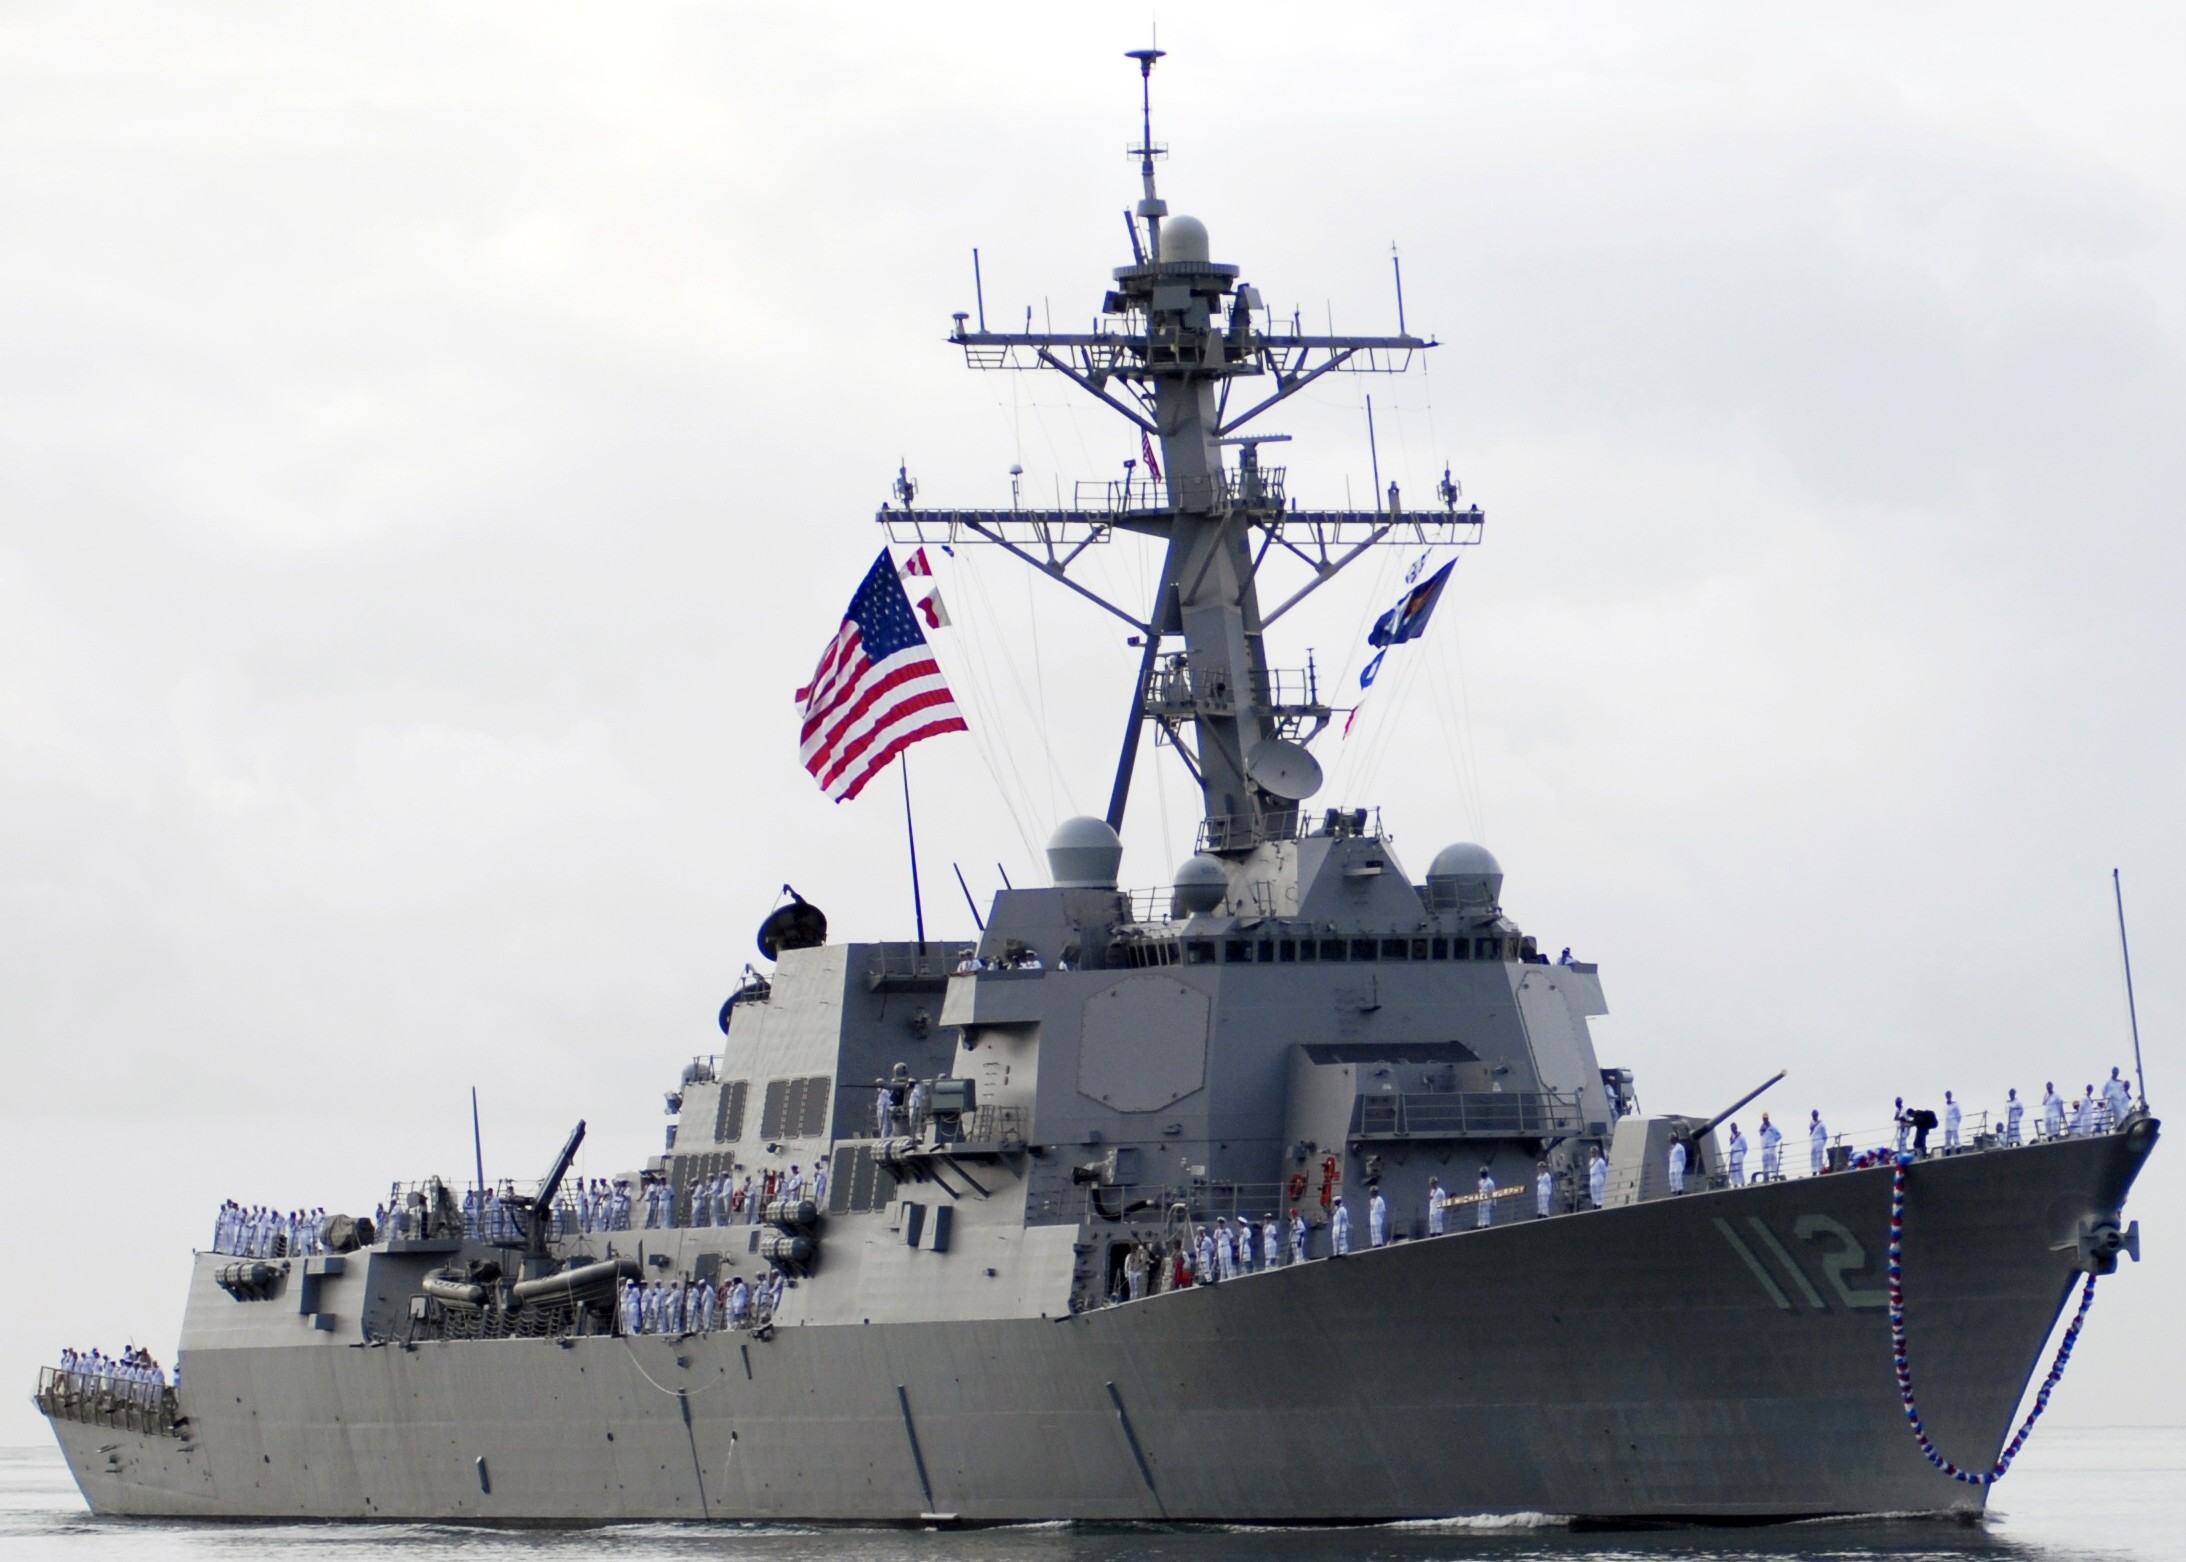 ddg-112 uss michael murphy arleigh burke class guided missile destroyer aegis us navy 08